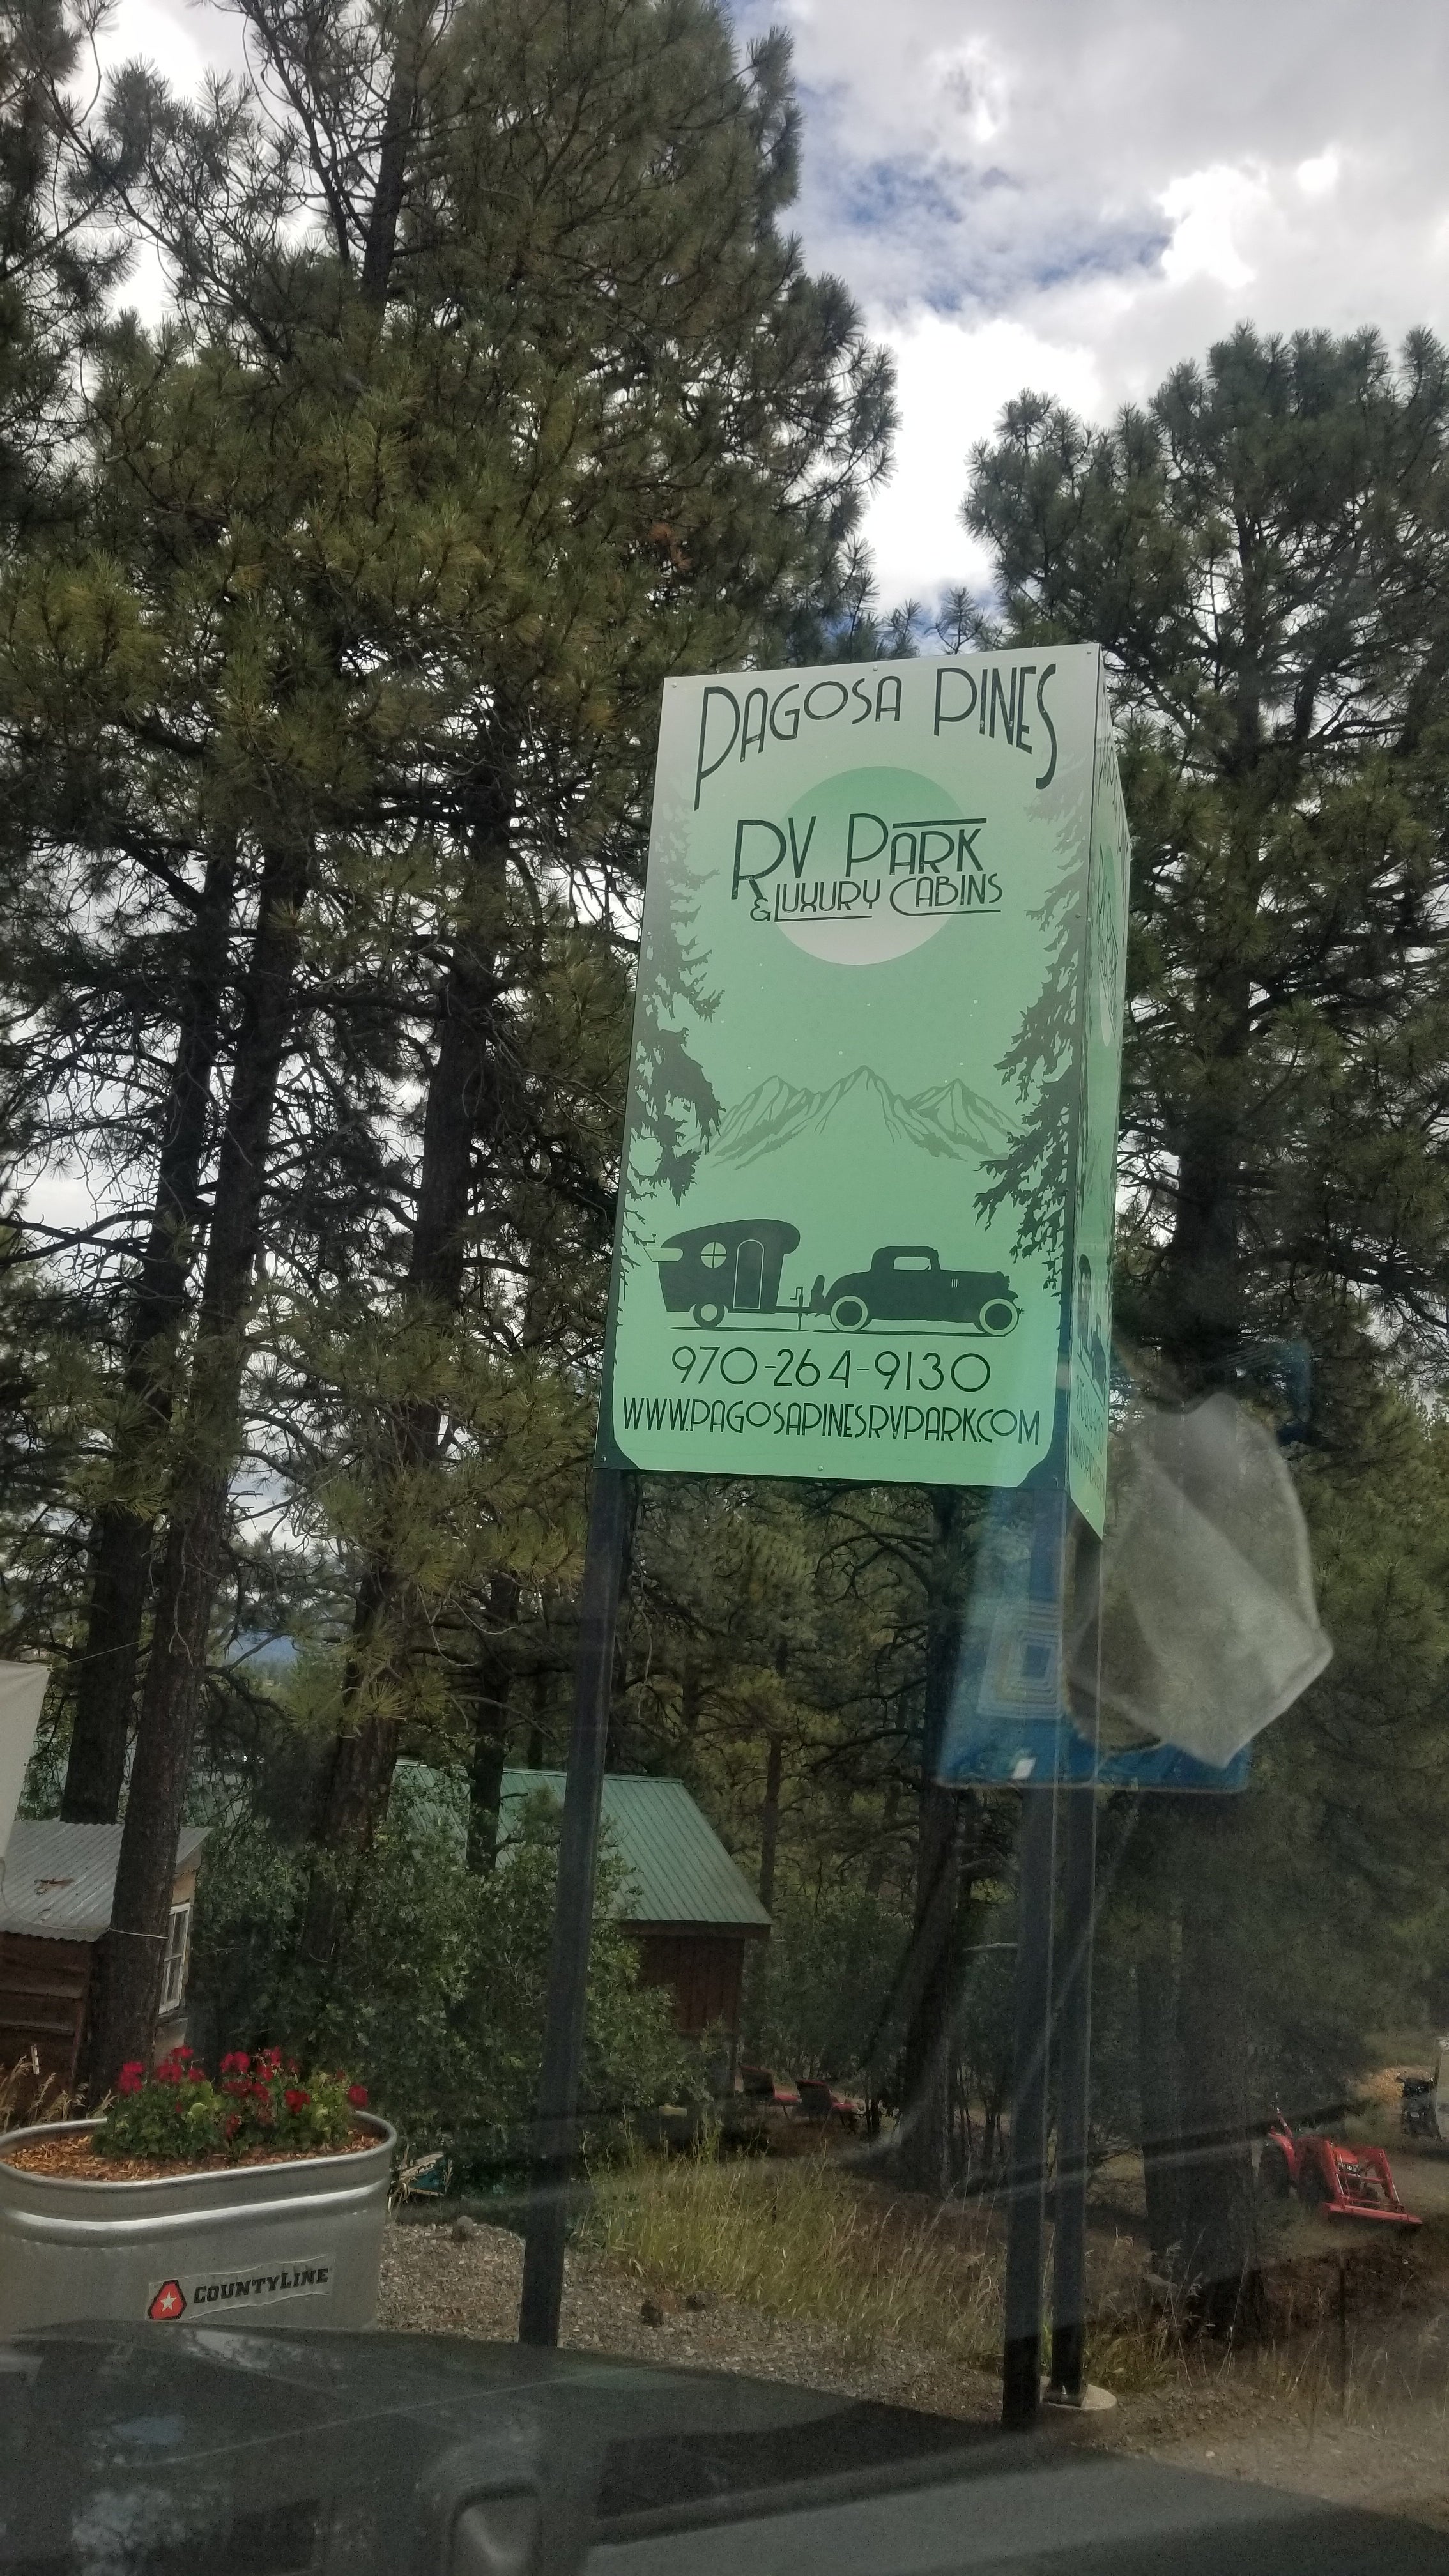 Camper submitted image from Pagosa Pines RV Park - 2